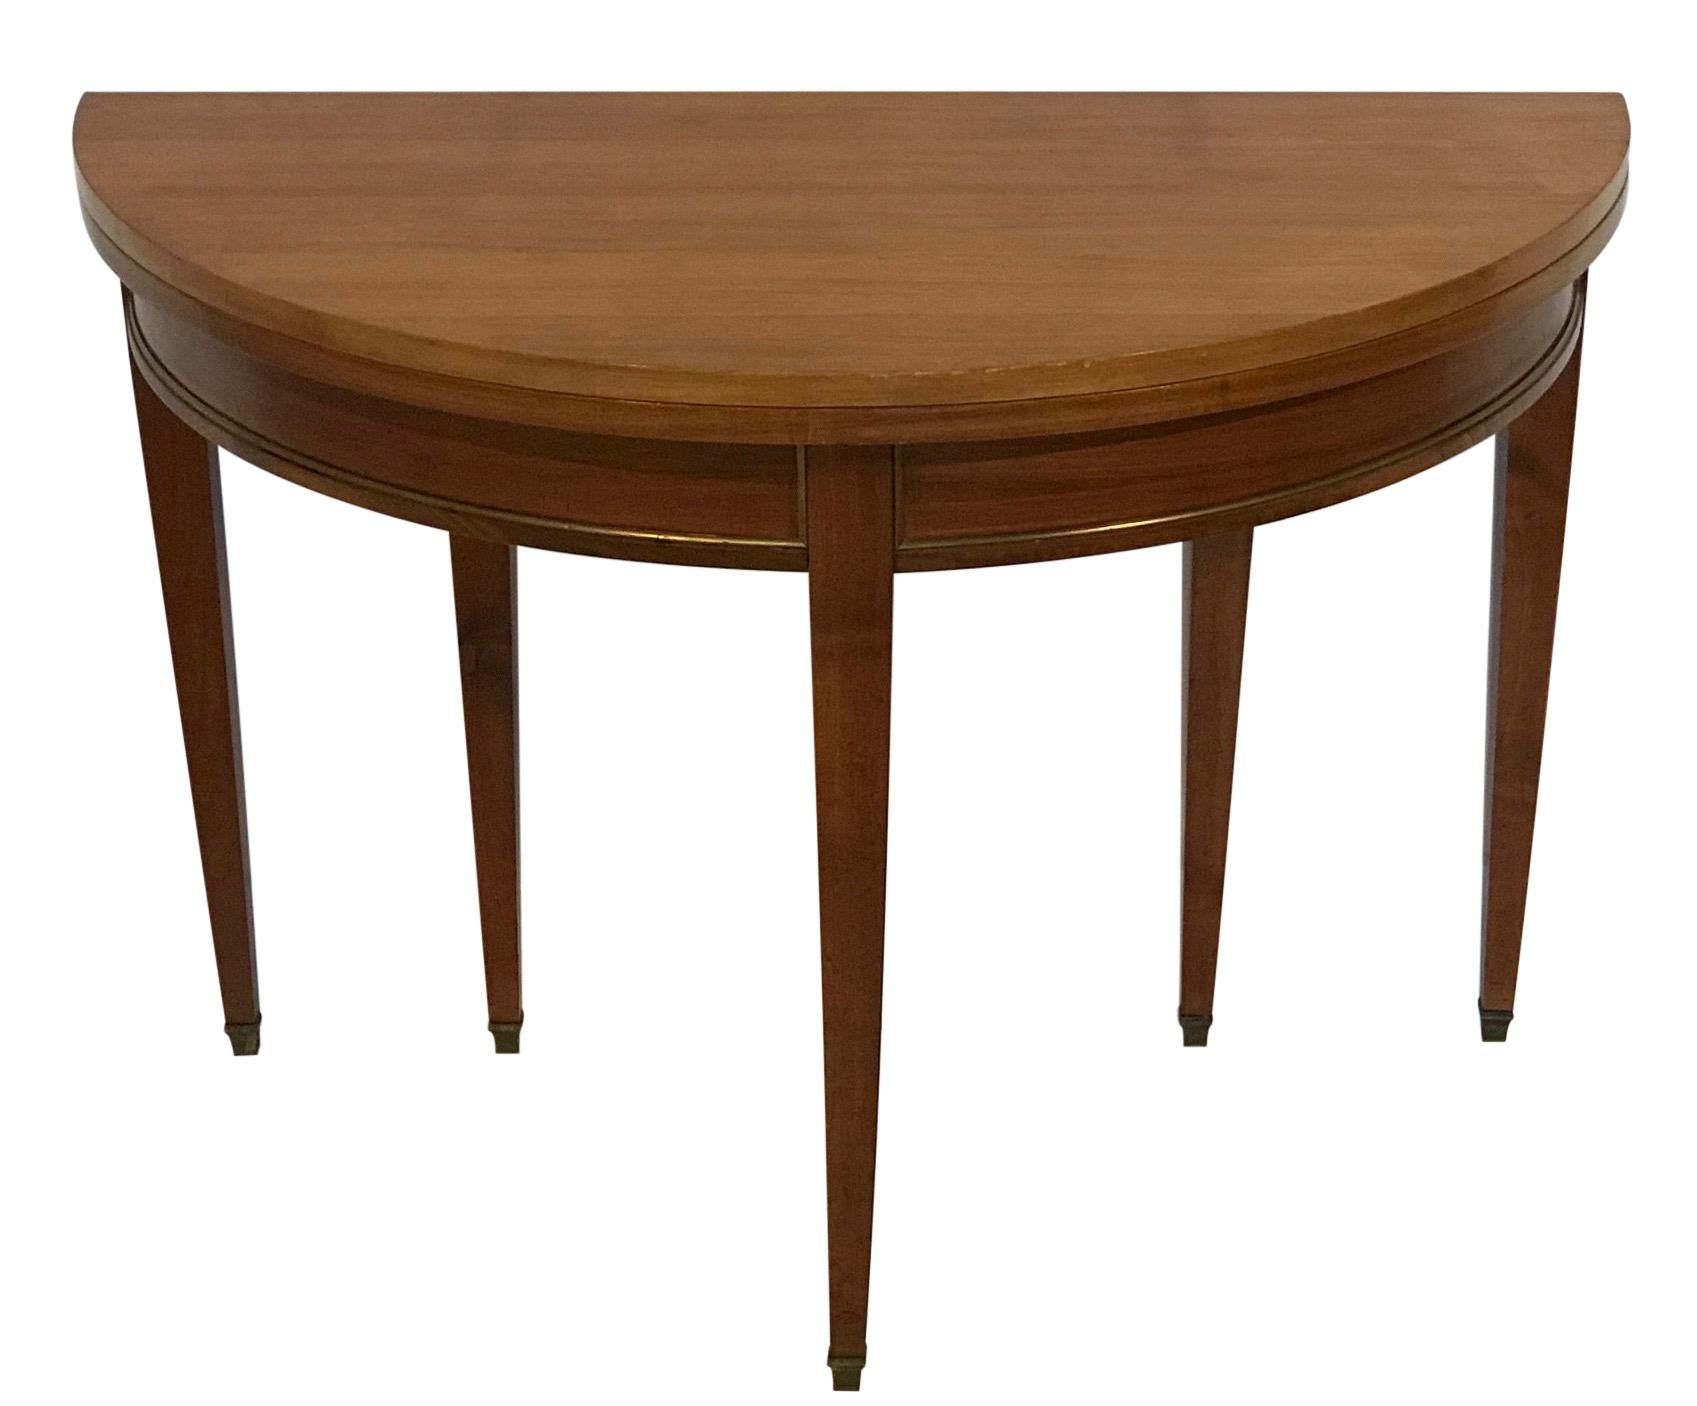 20th Century French Directoire Style Cherrywood Demilune Table